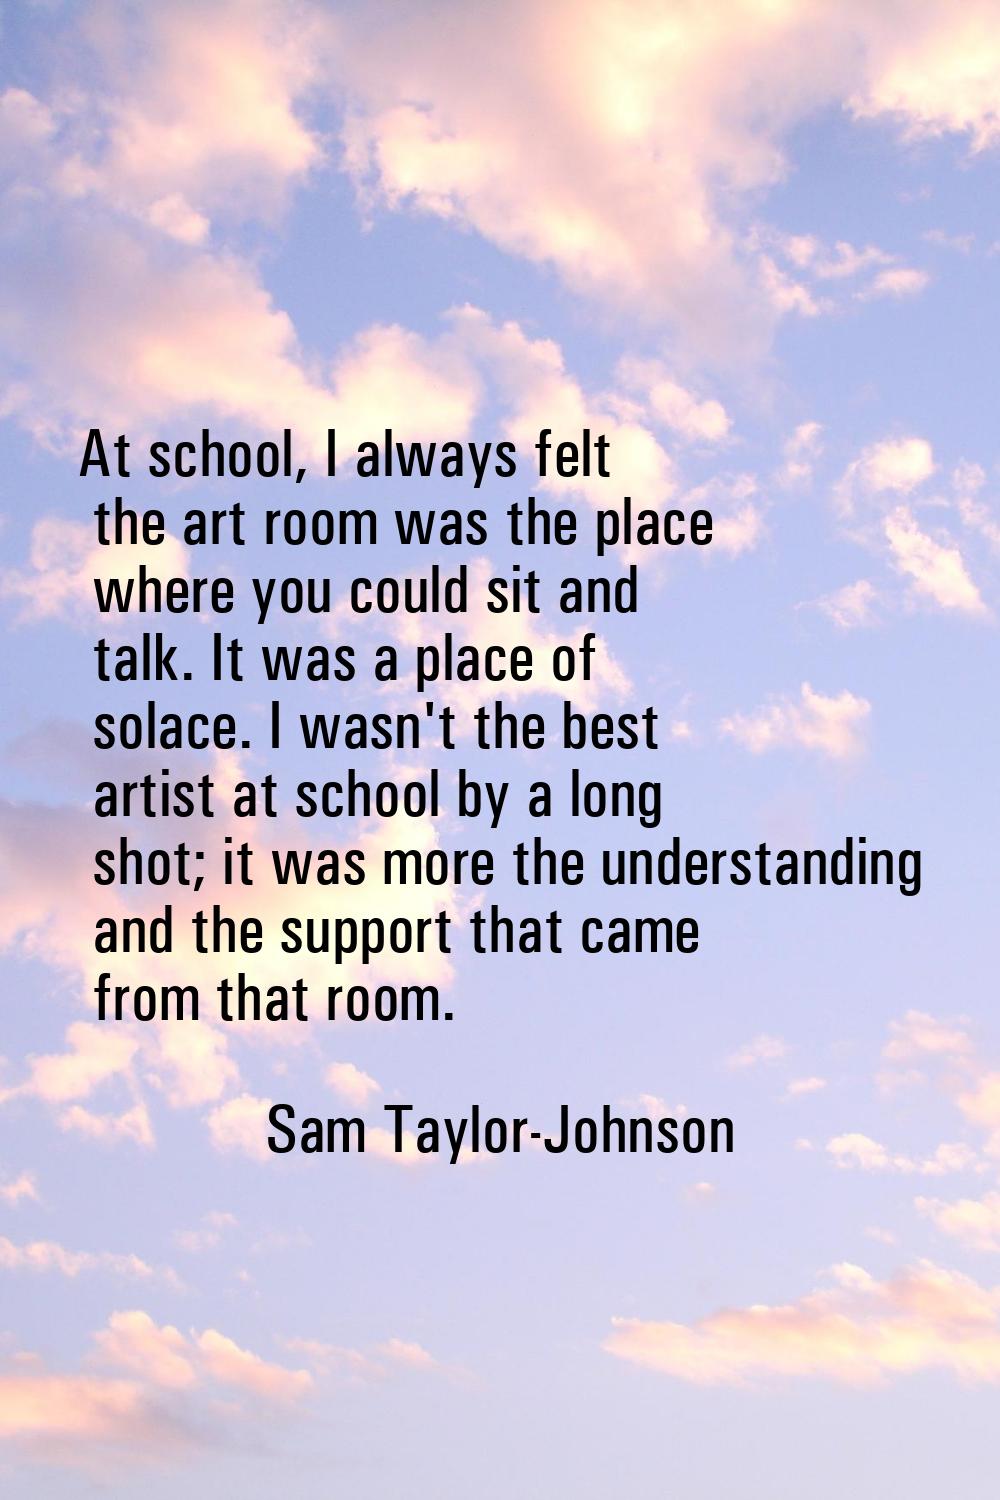 At school, I always felt the art room was the place where you could sit and talk. It was a place of